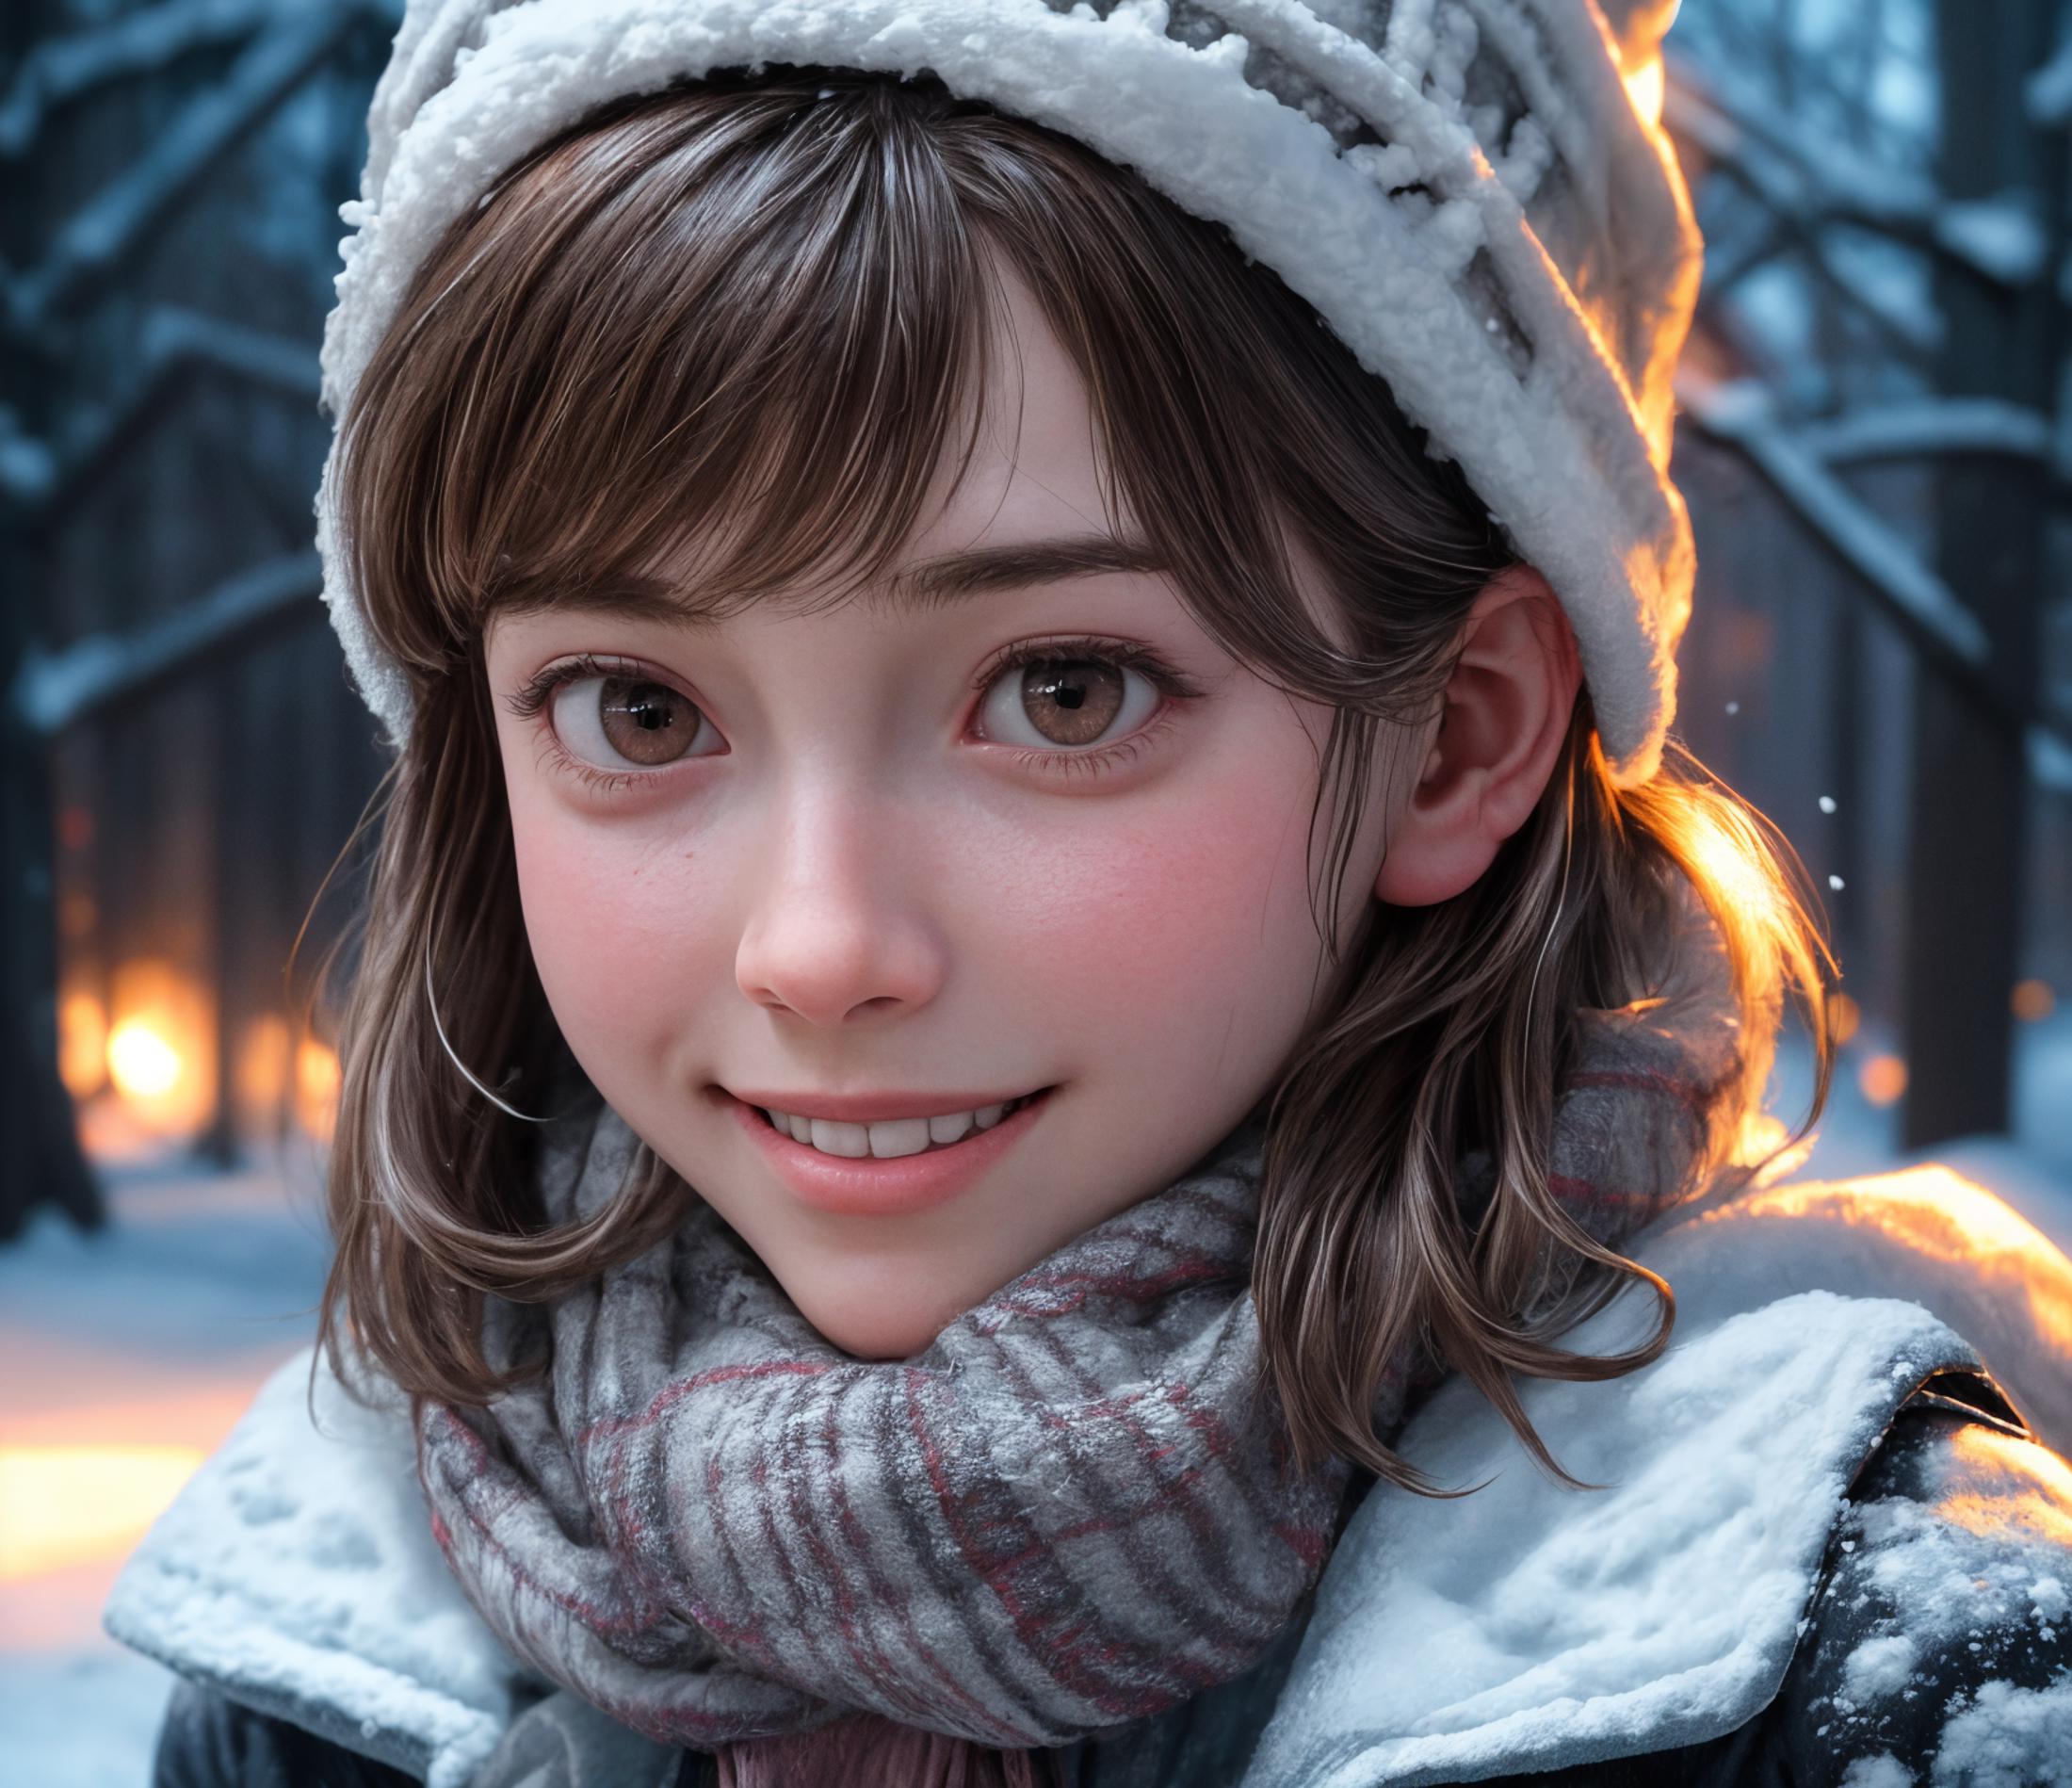 A smiling girl with a big smile and a hat.